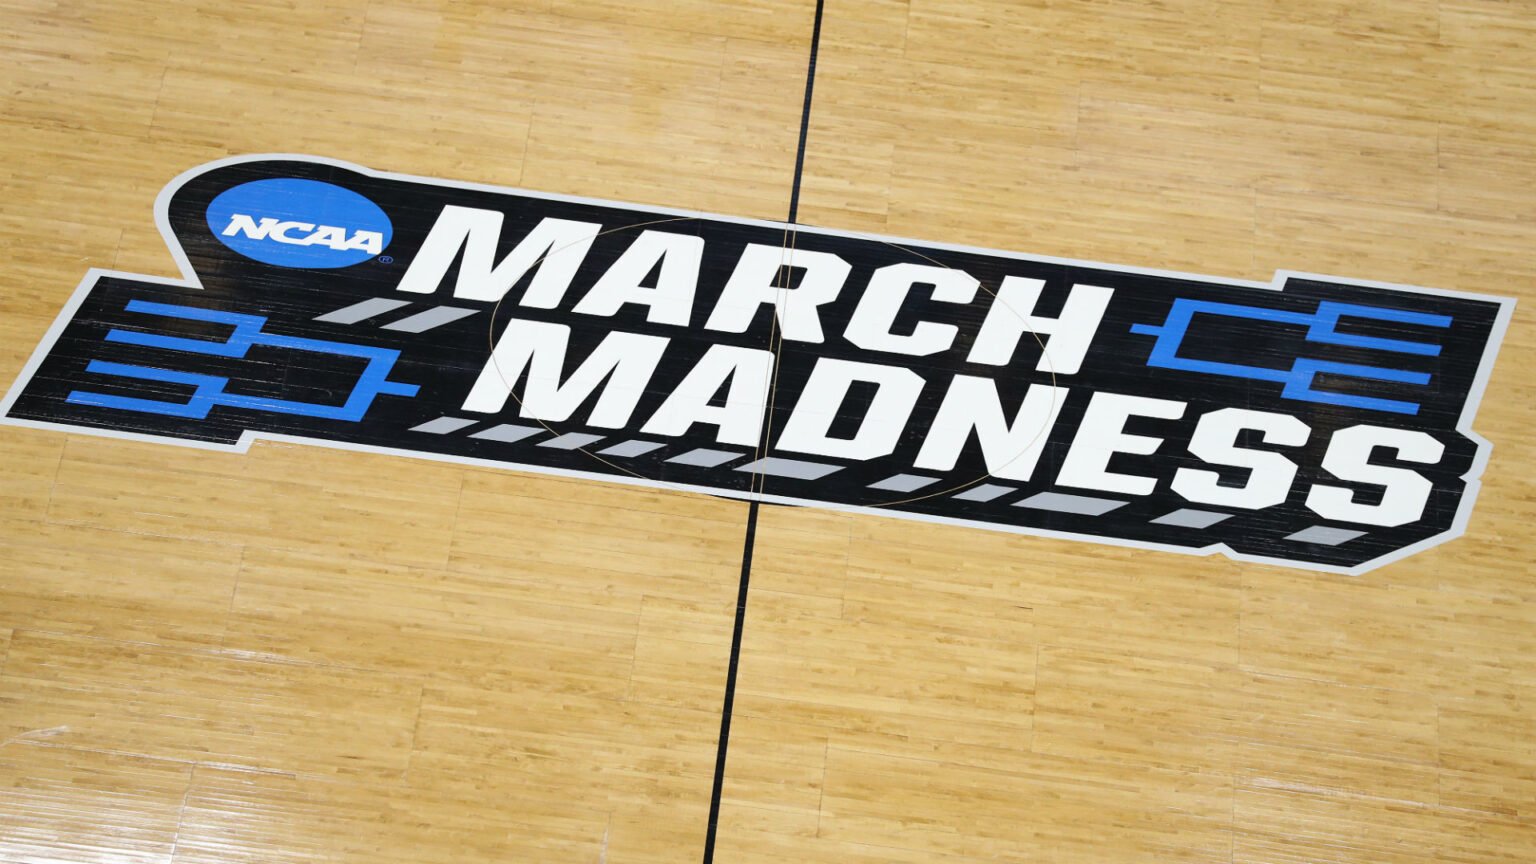 In the middle of March Madness, Twitter exposed a double standard between NCAA men's a women's college basketball. Bounce into the story here.